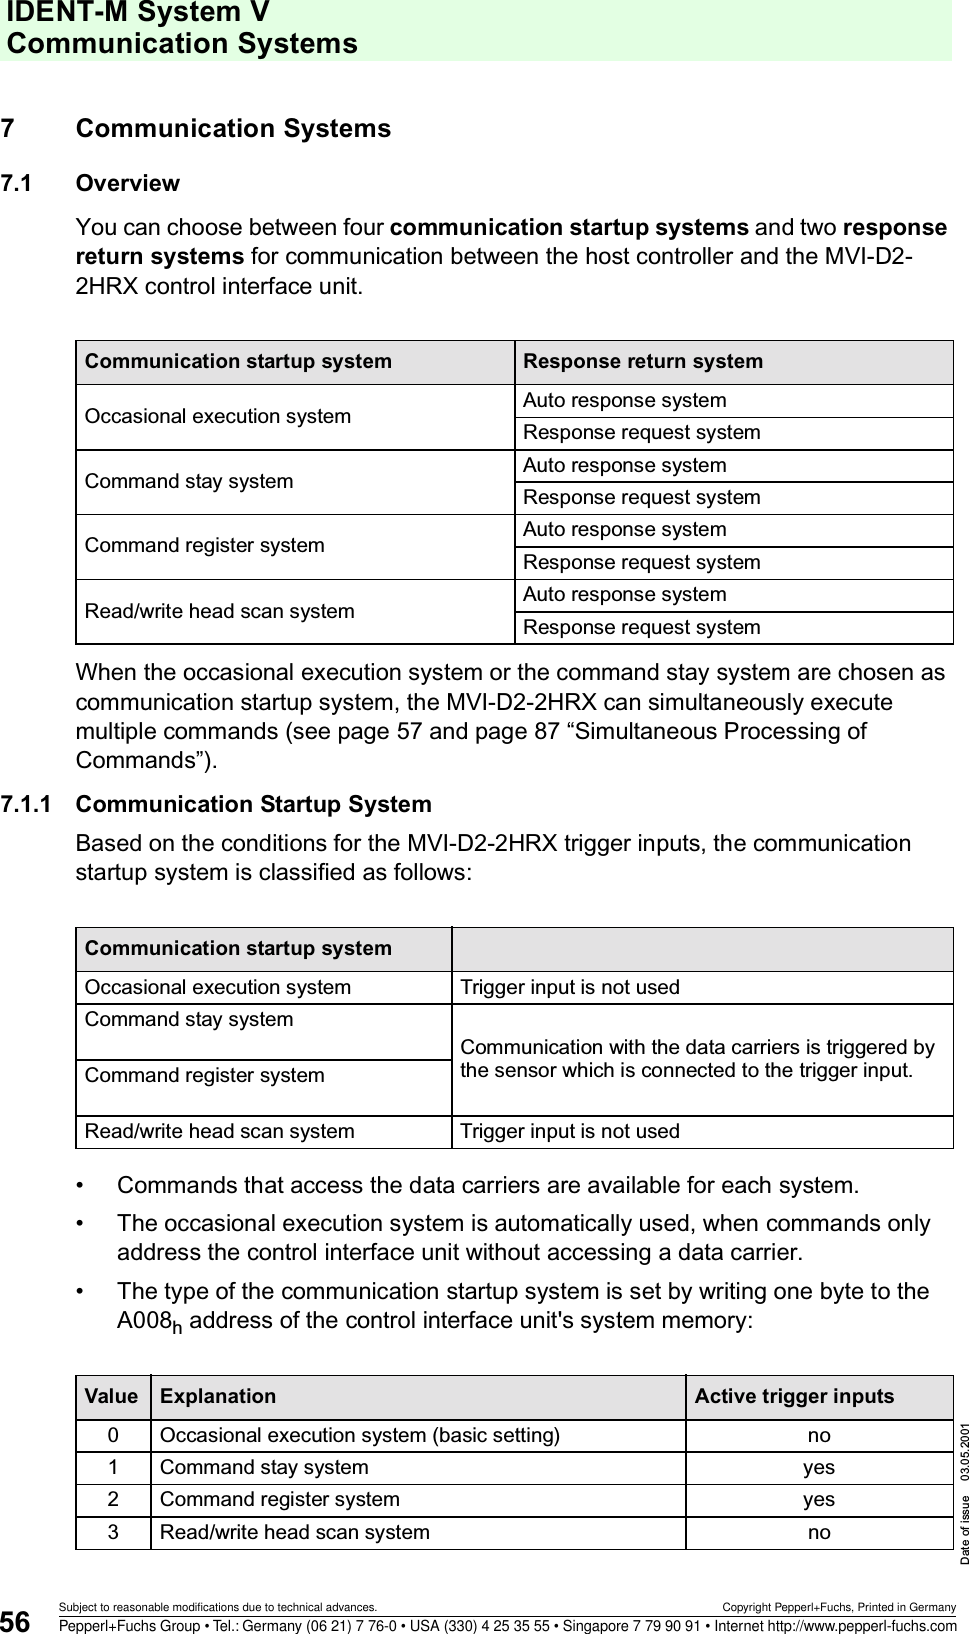 IDENT-M System V Communication SystemsDate of issue 03.05.200156Subject to reasonable modifications due to technical advances. Copyright Pepperl+Fuchs, Printed in GermanyPepperl+Fuchs Group • Tel.: Germany (06 21) 7 76-0 • USA (330) 4 25 35 55 • Singapore 7 79 90 91 • Internet http://www.pepperl-fuchs.com7 Communication Systems7.1 OverviewYou can choose between four communication startup systems and two response return systems for communication between the host controller and the MVI-D2-2HRX control interface unit.When the occasional execution system or the command stay system are chosen as communication startup system, the MVI-D2-2HRX can simultaneously execute multiple commands (see page 57 and page 87 “Simultaneous Processing of Commands”).7.1.1 Communication Startup SystemBased on the conditions for the MVI-D2-2HRX trigger inputs, the communication startup system is classified as follows:• Commands that access the data carriers are available for each system.• The occasional execution system is automatically used, when commands only address the control interface unit without accessing a data carrier.• The type of the communication startup system is set by writing one byte to the A008h address of the control interface unit&apos;s system memory:Communication startup system Response return systemOccasional execution system Auto response systemResponse request systemCommand stay system Auto response systemResponse request systemCommand register system Auto response systemResponse request systemRead/write head scan system Auto response systemResponse request systemCommunication startup systemOccasional execution system Trigger input is not usedCommand stay systemCommunication with the data carriers is triggered by the sensor which is connected to the trigger input.Command register systemRead/write head scan system Trigger input is not usedValue Explanation Active trigger inputs0 Occasional execution system (basic setting) no1 Command stay system yes2 Command register system yes3 Read/write head scan system no